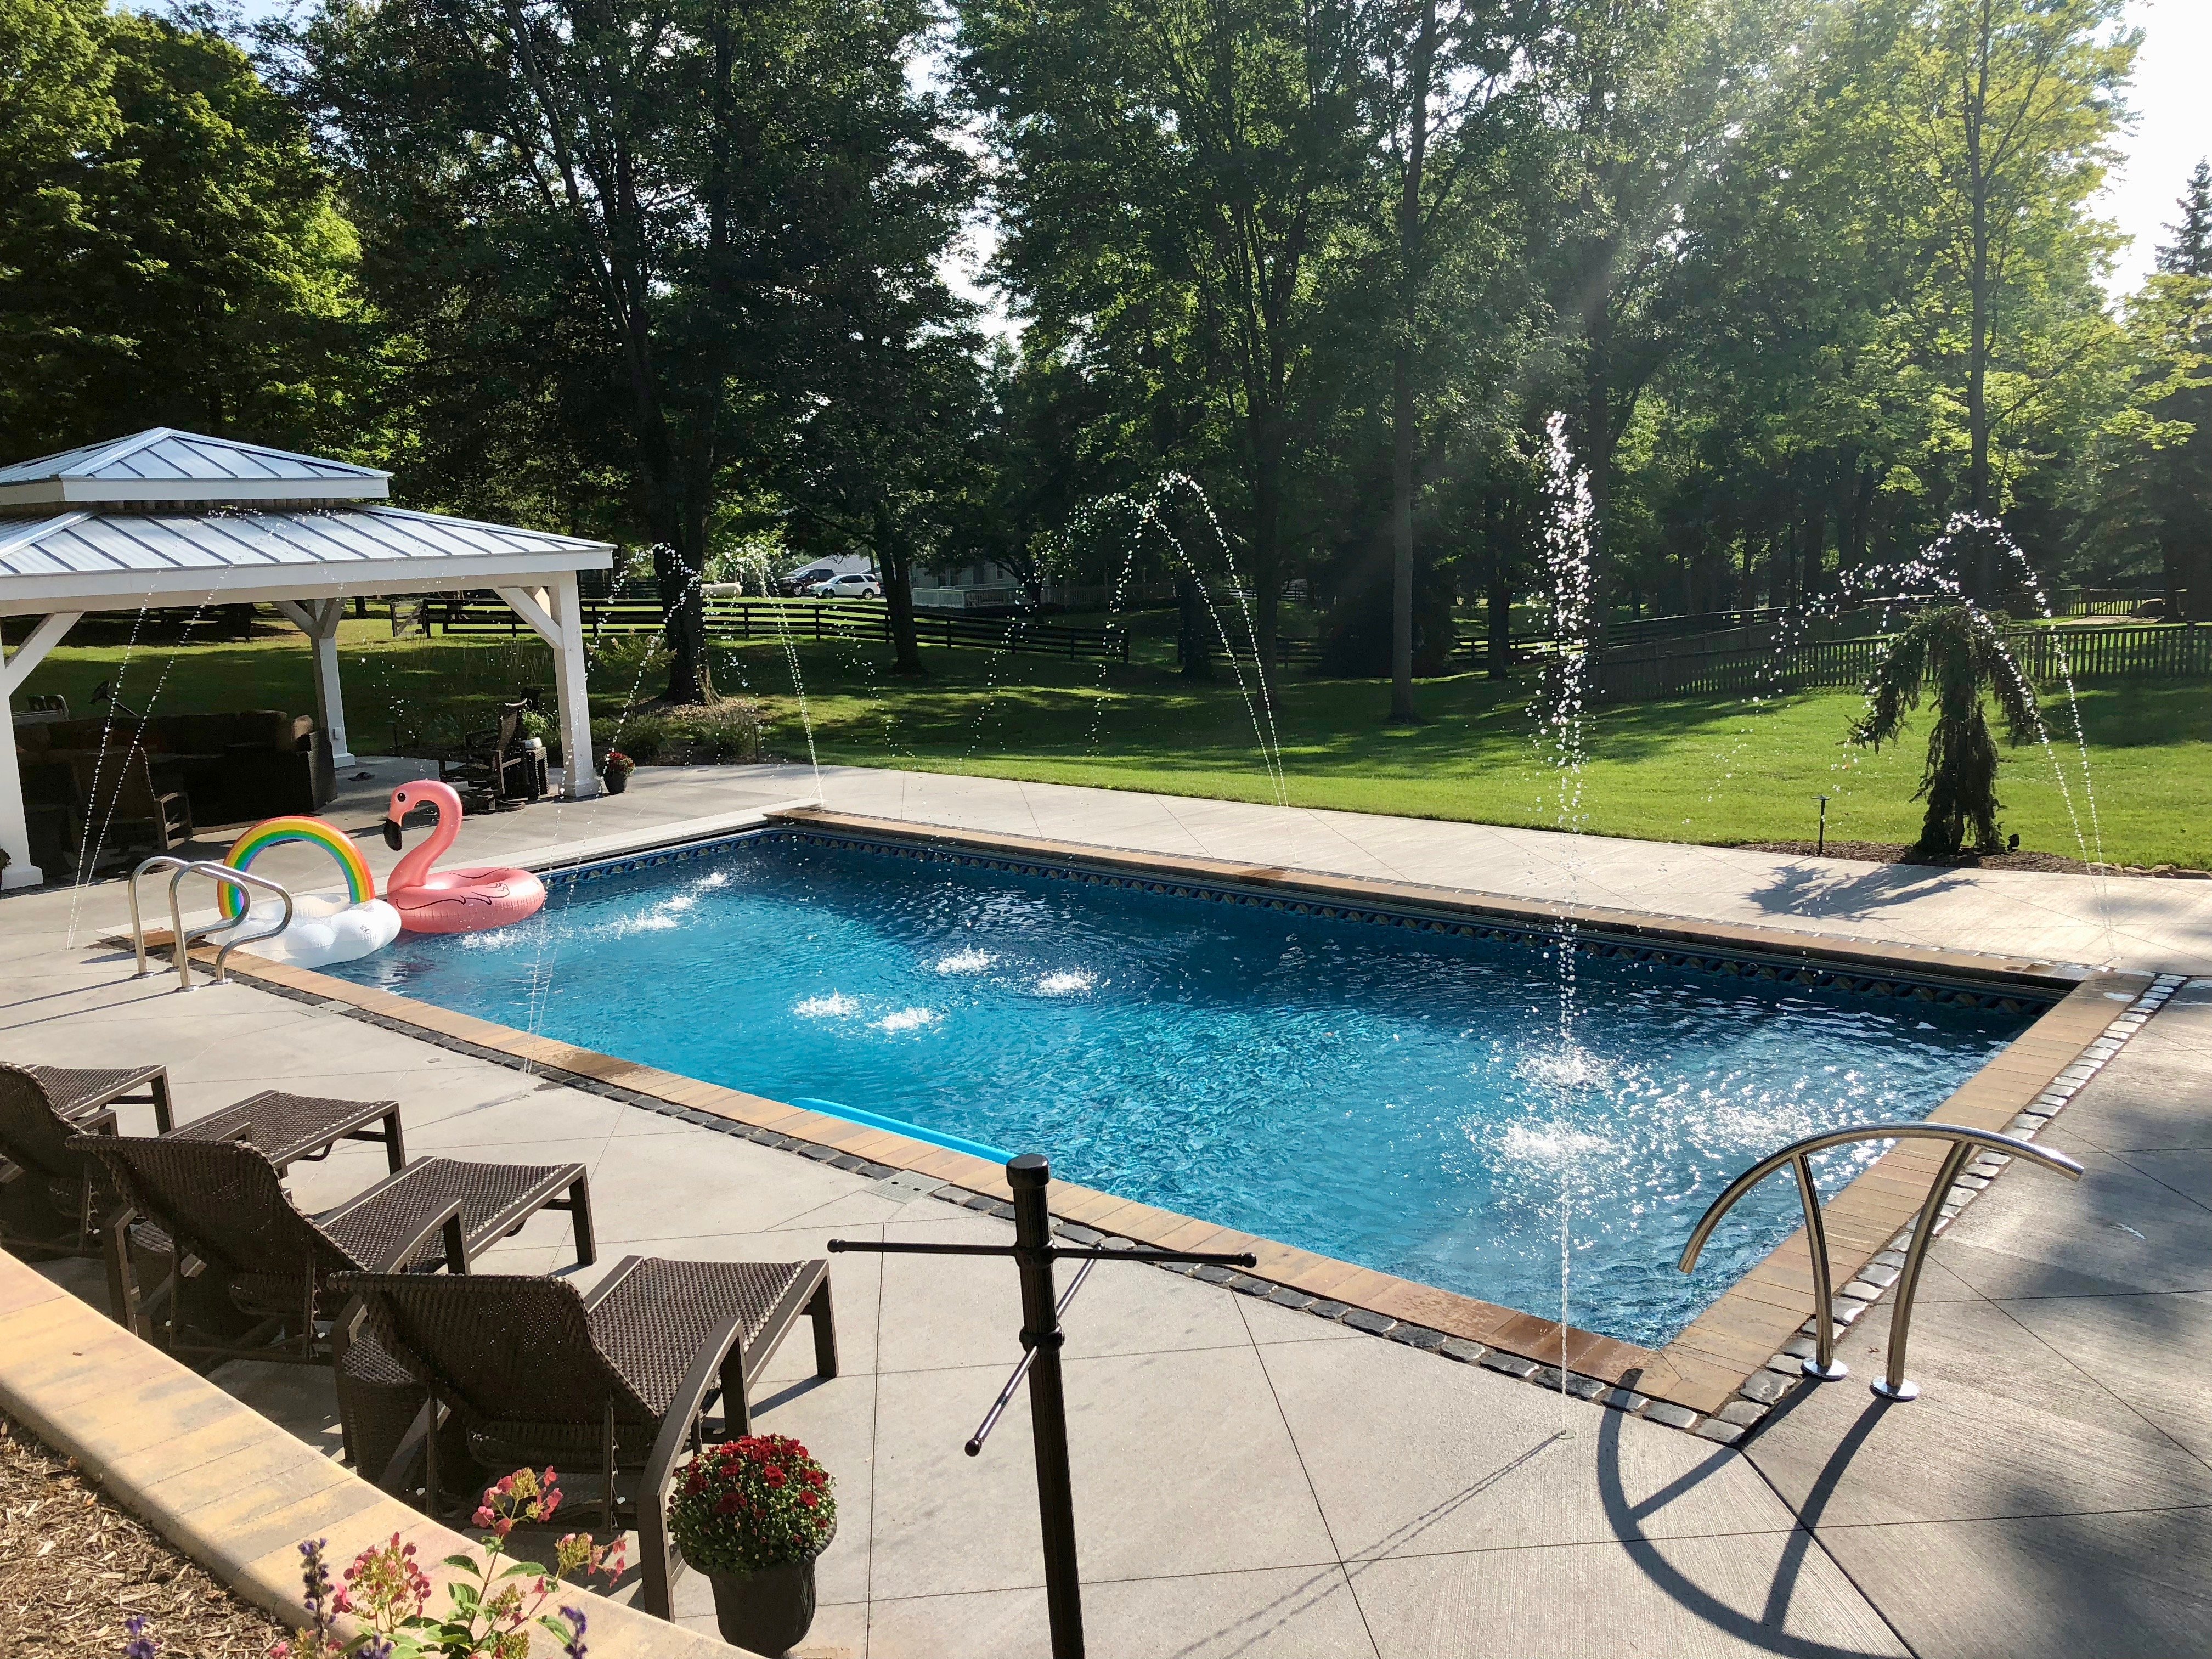 How much does an inground swimming pool cost?